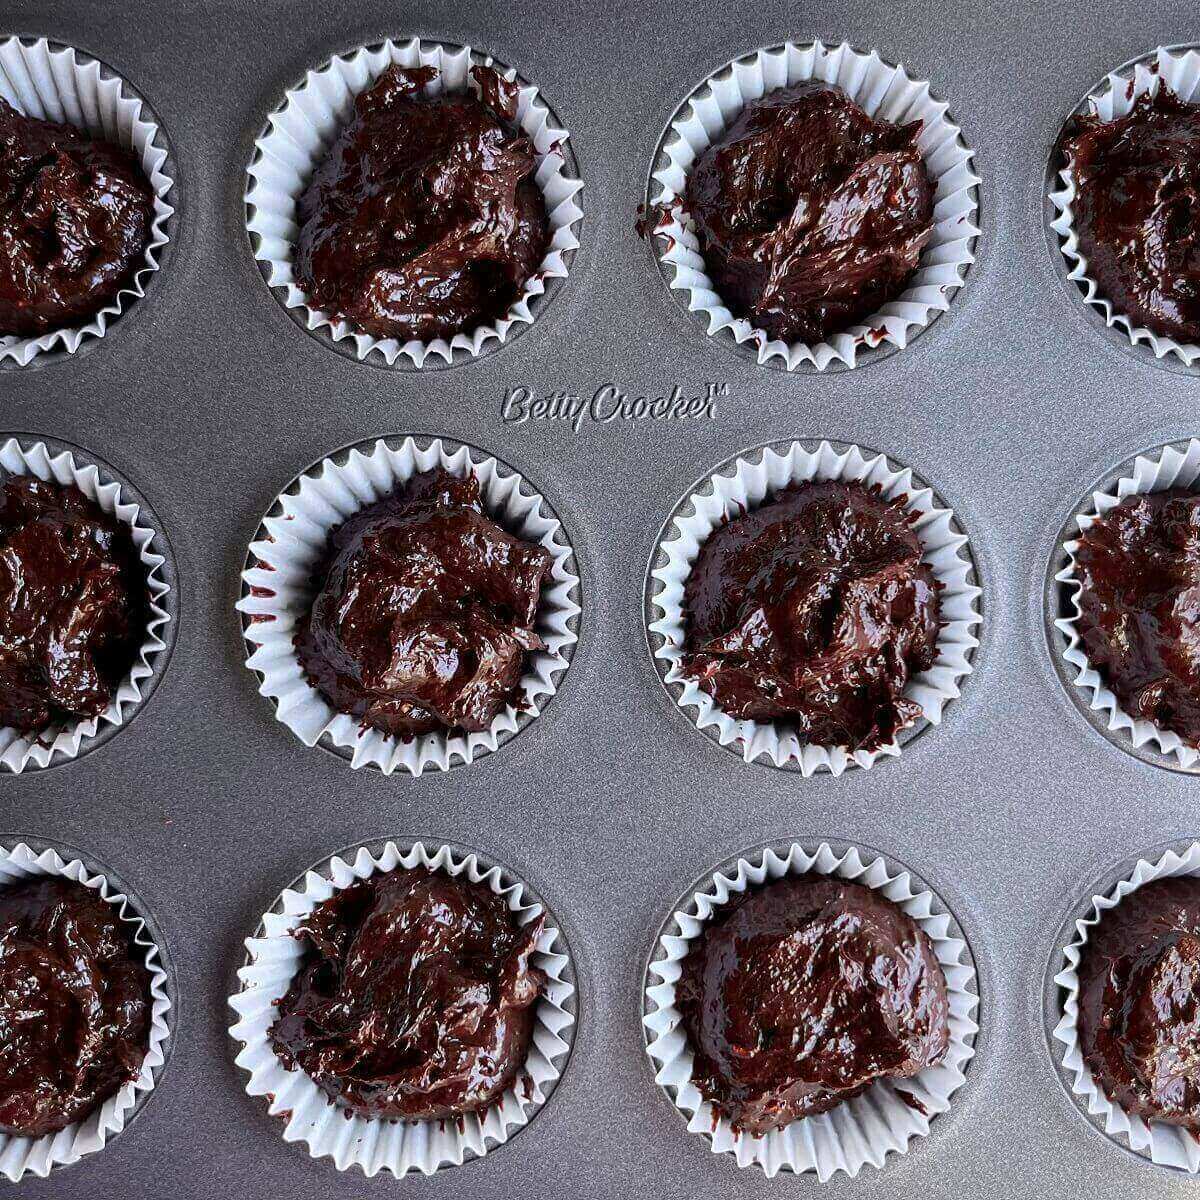 Chocolate raspberry mixture portions in a mini muffin pan.